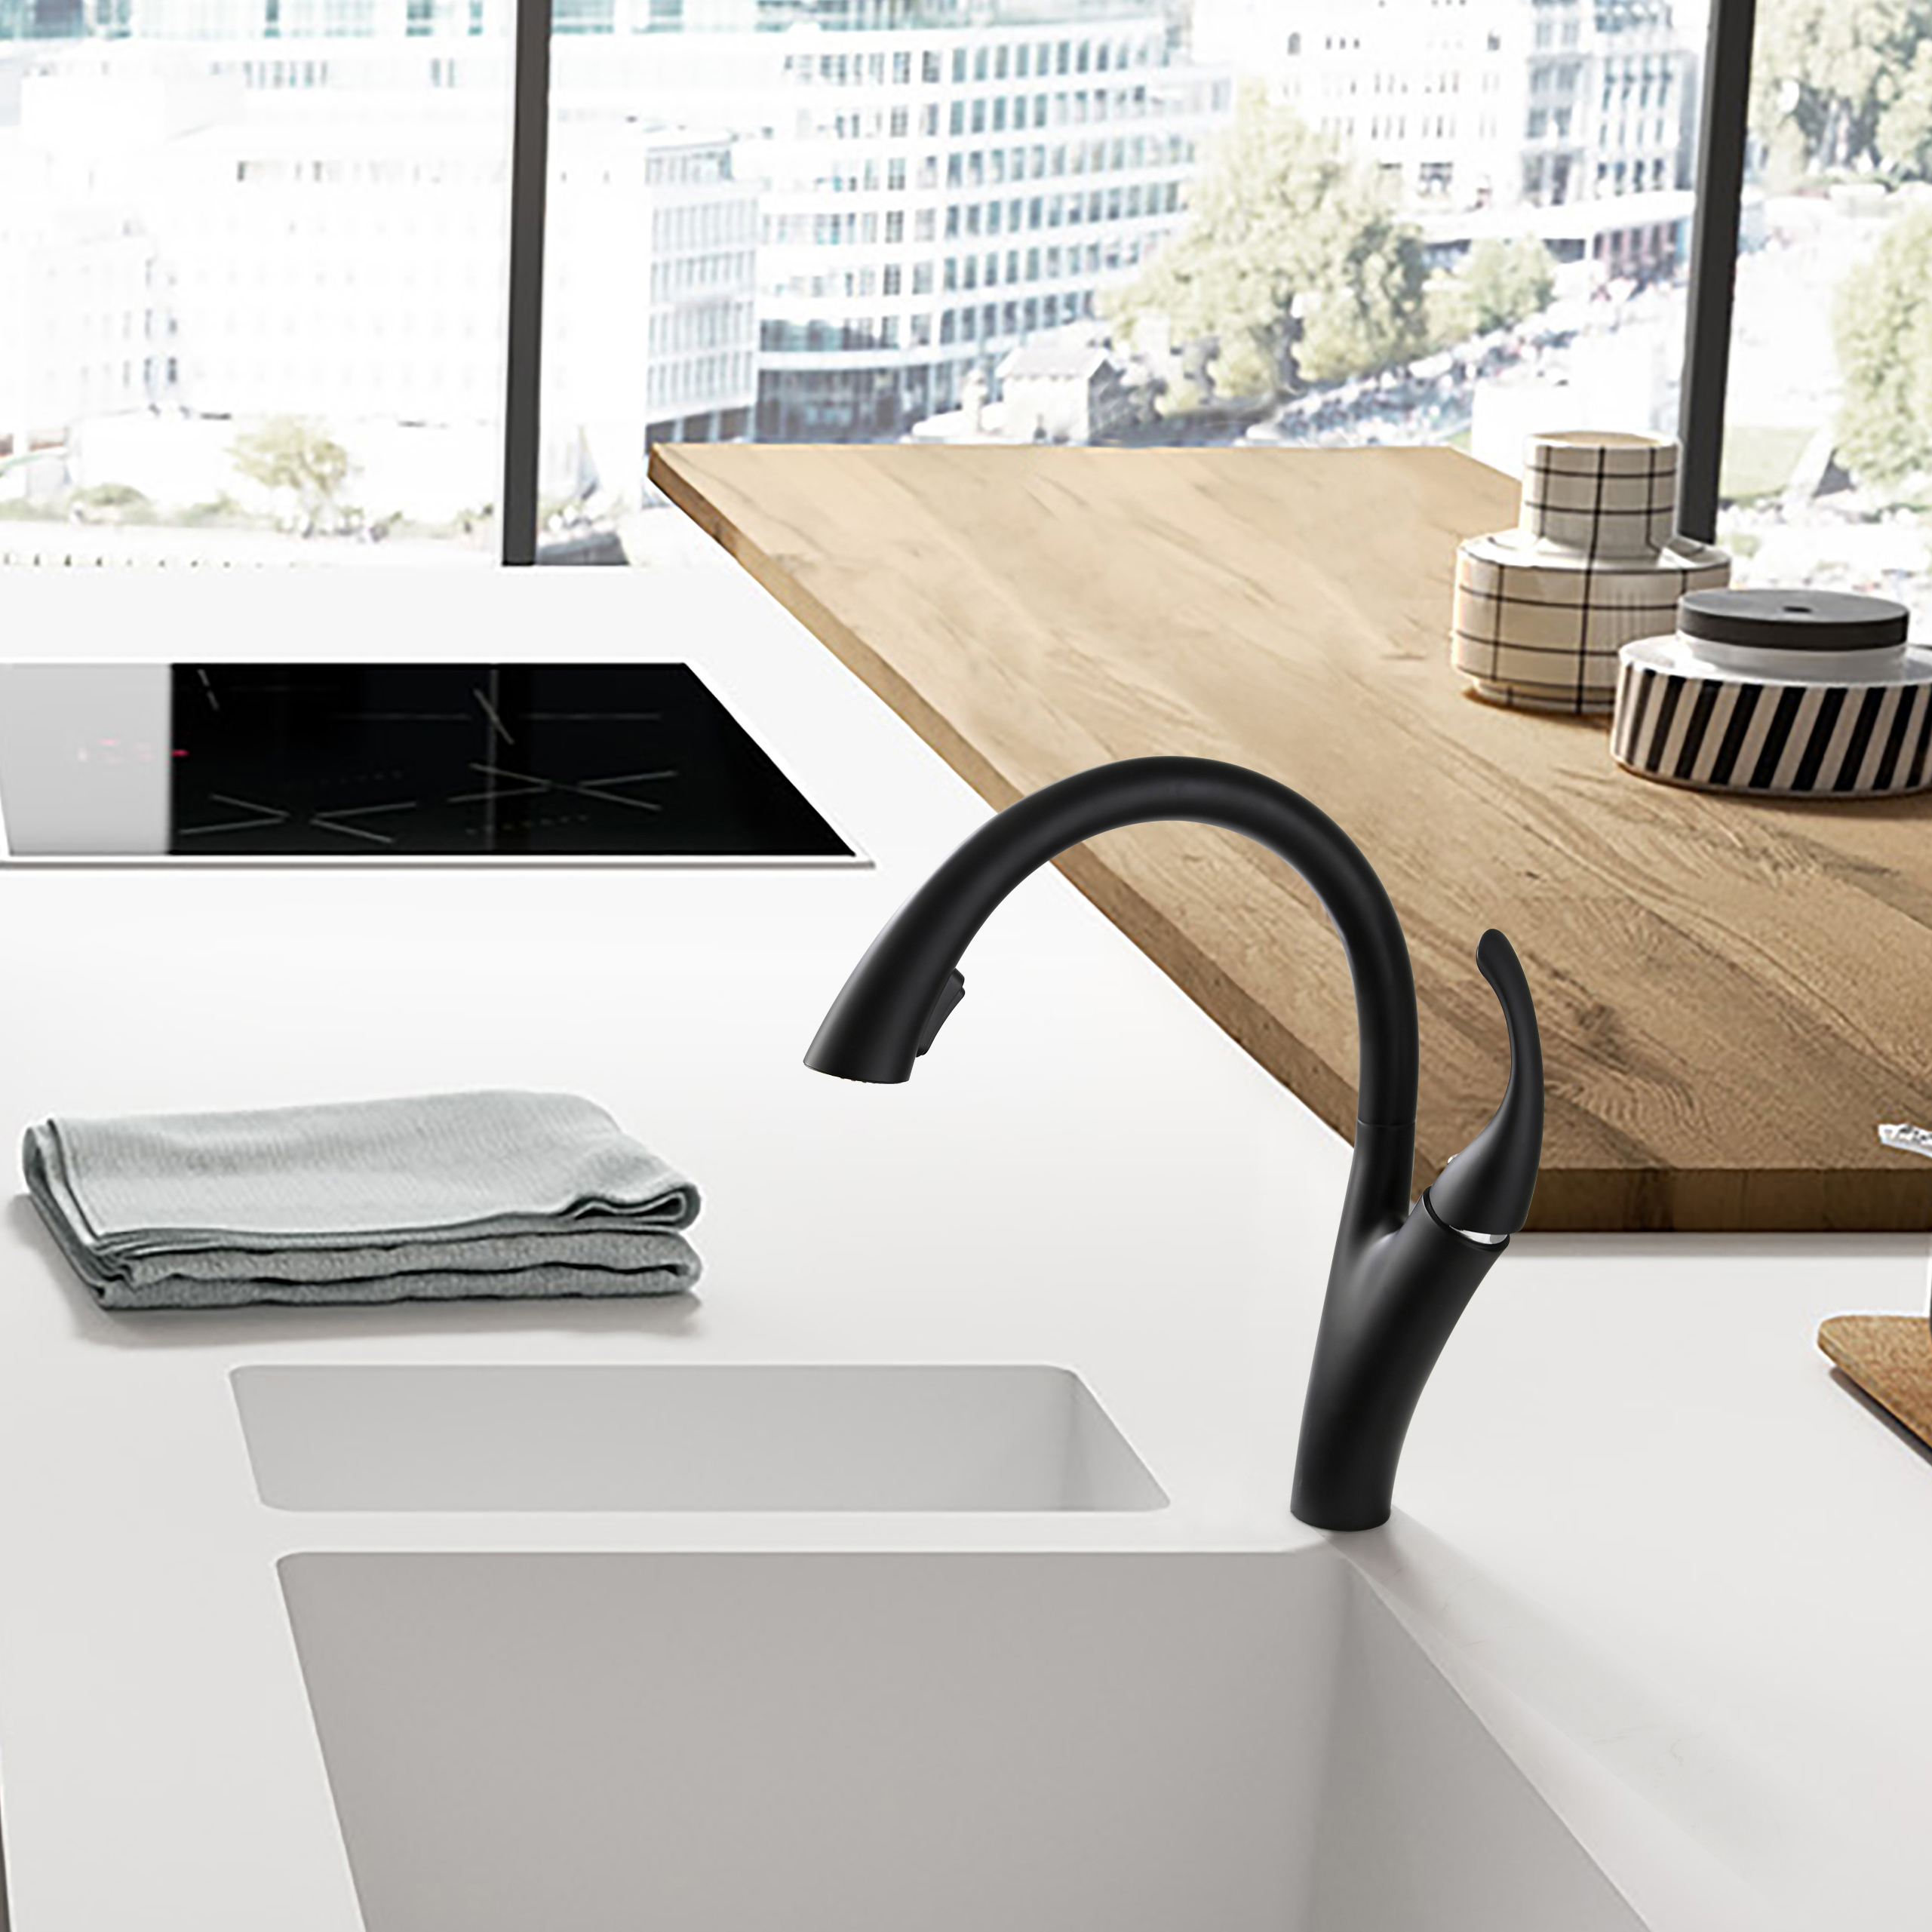 Multifunctional Hide Spray Sink Mixer Hanging Kitchen Faucet With Great Price